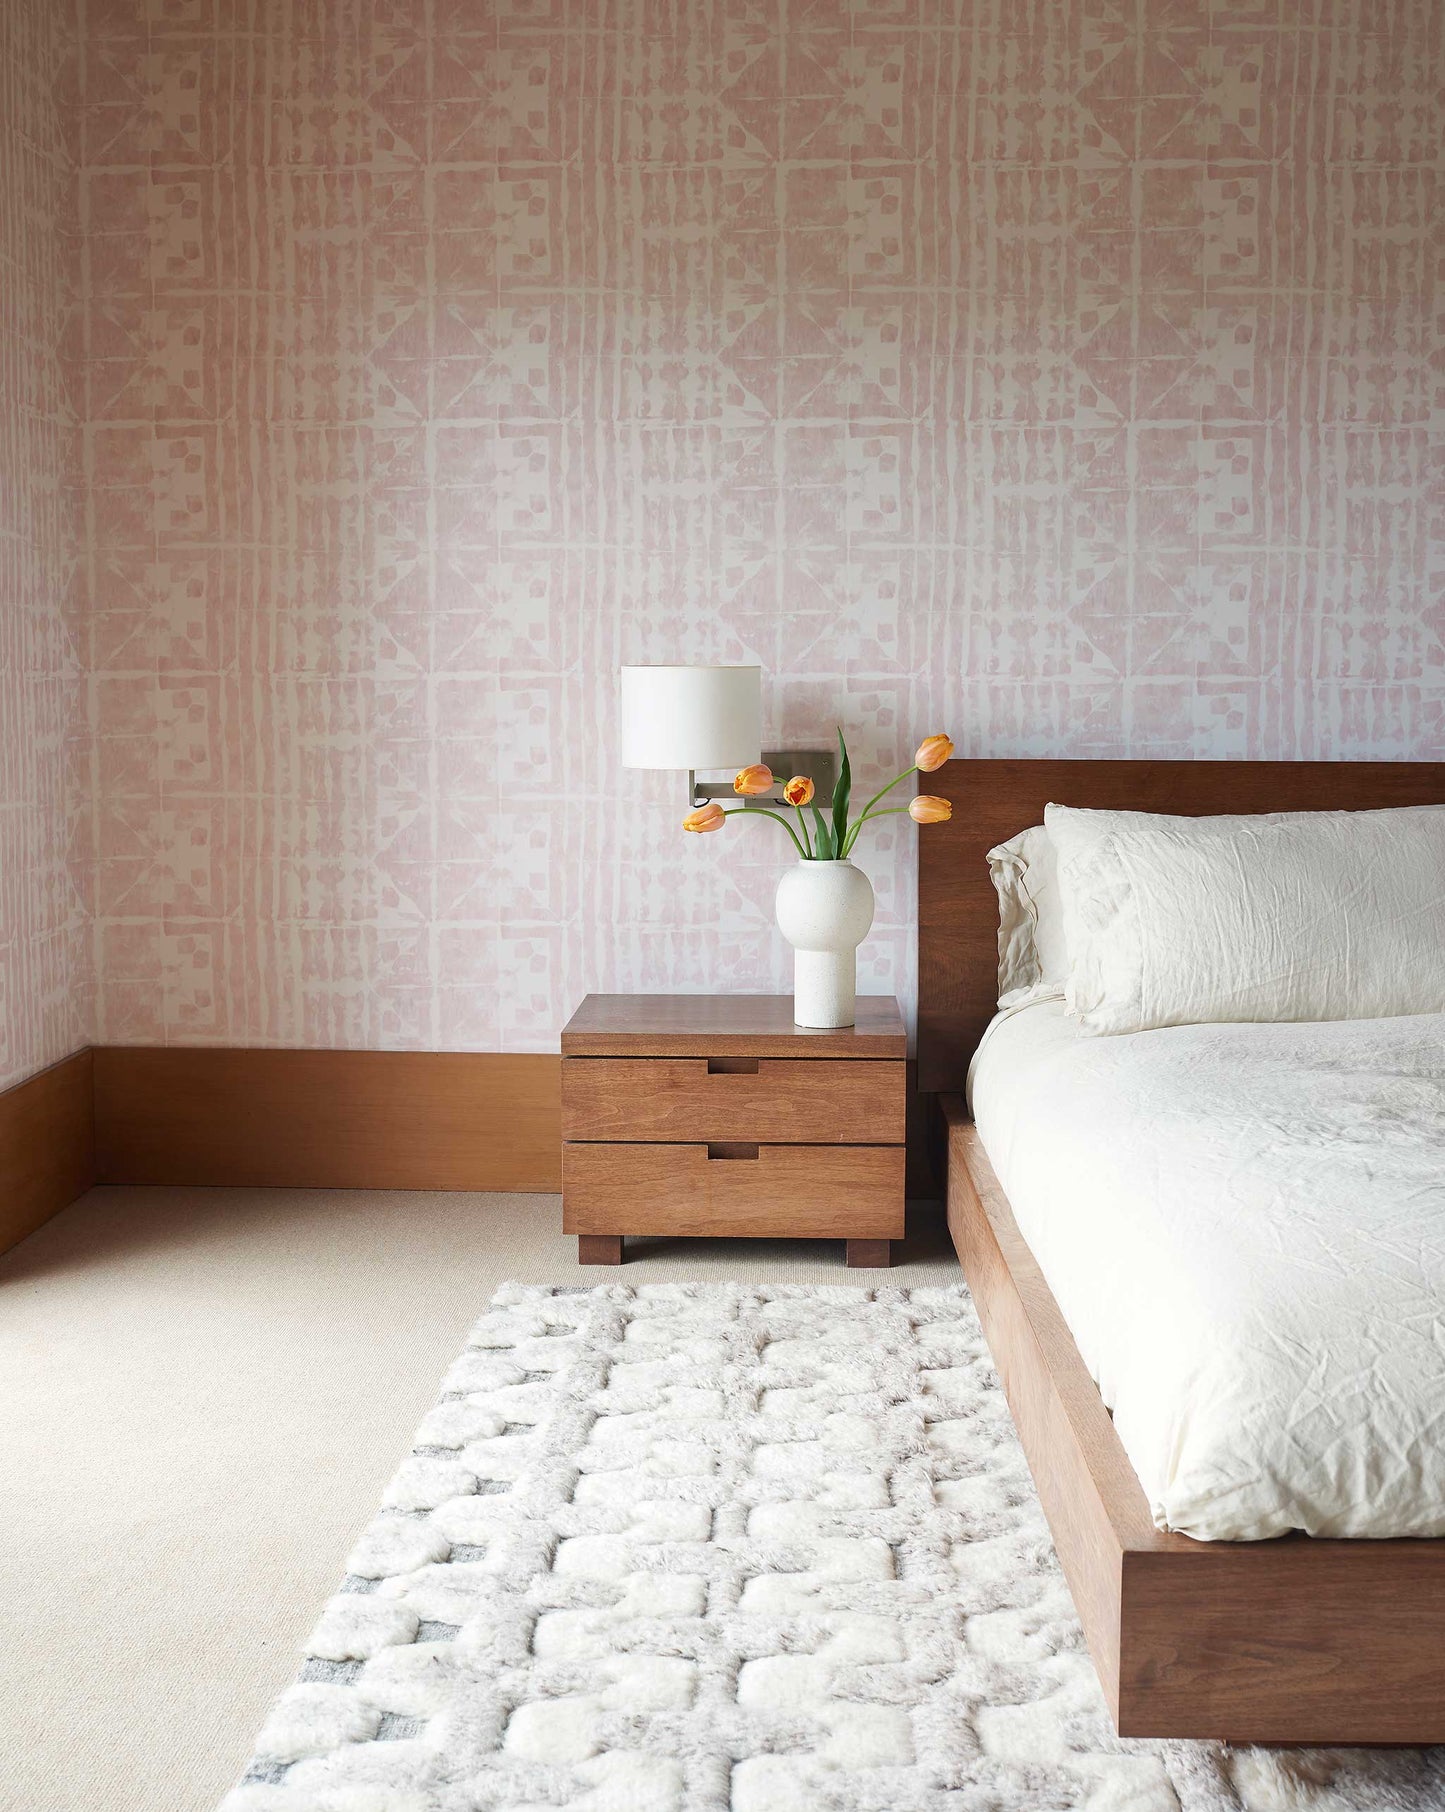 Eskayel's Banda Wallpaper in the colorway light peach installed in a bedroom with wooden and white accents.